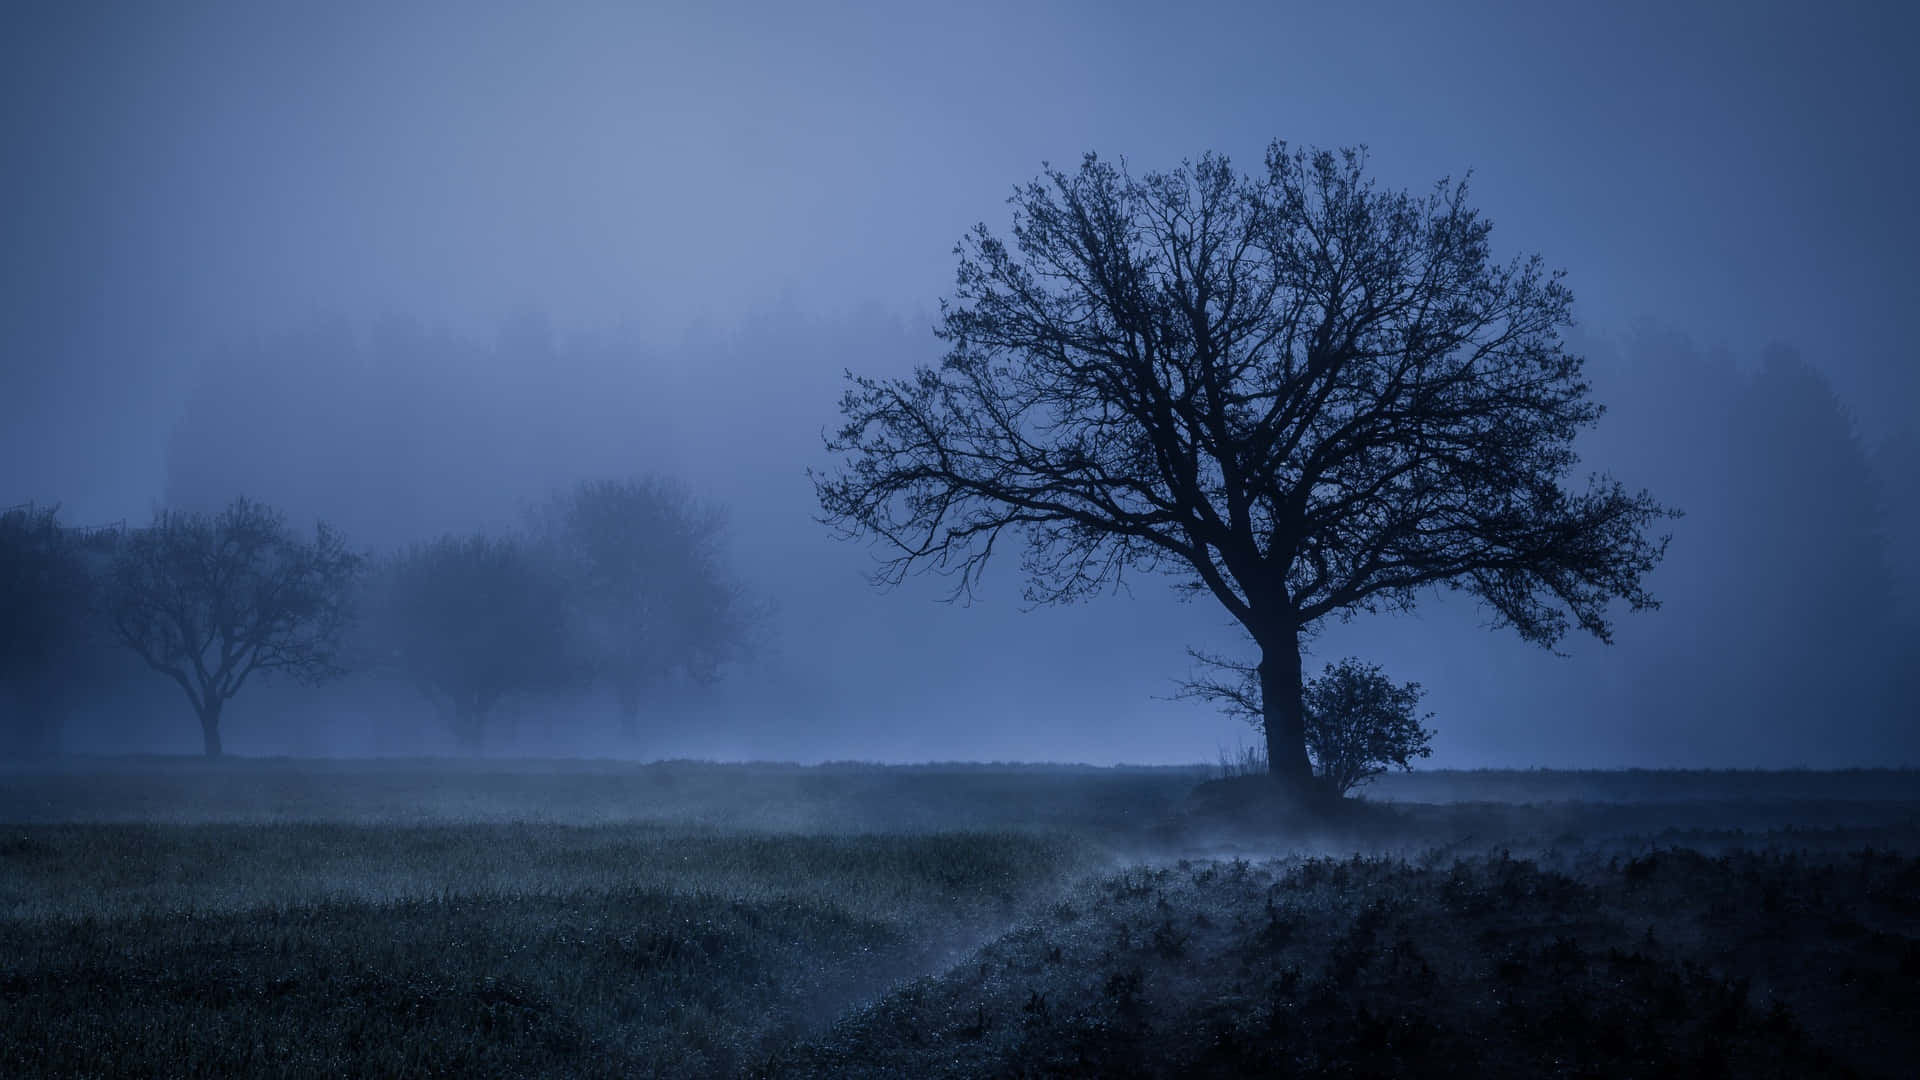 A calming fog rolling through a tree lined valley